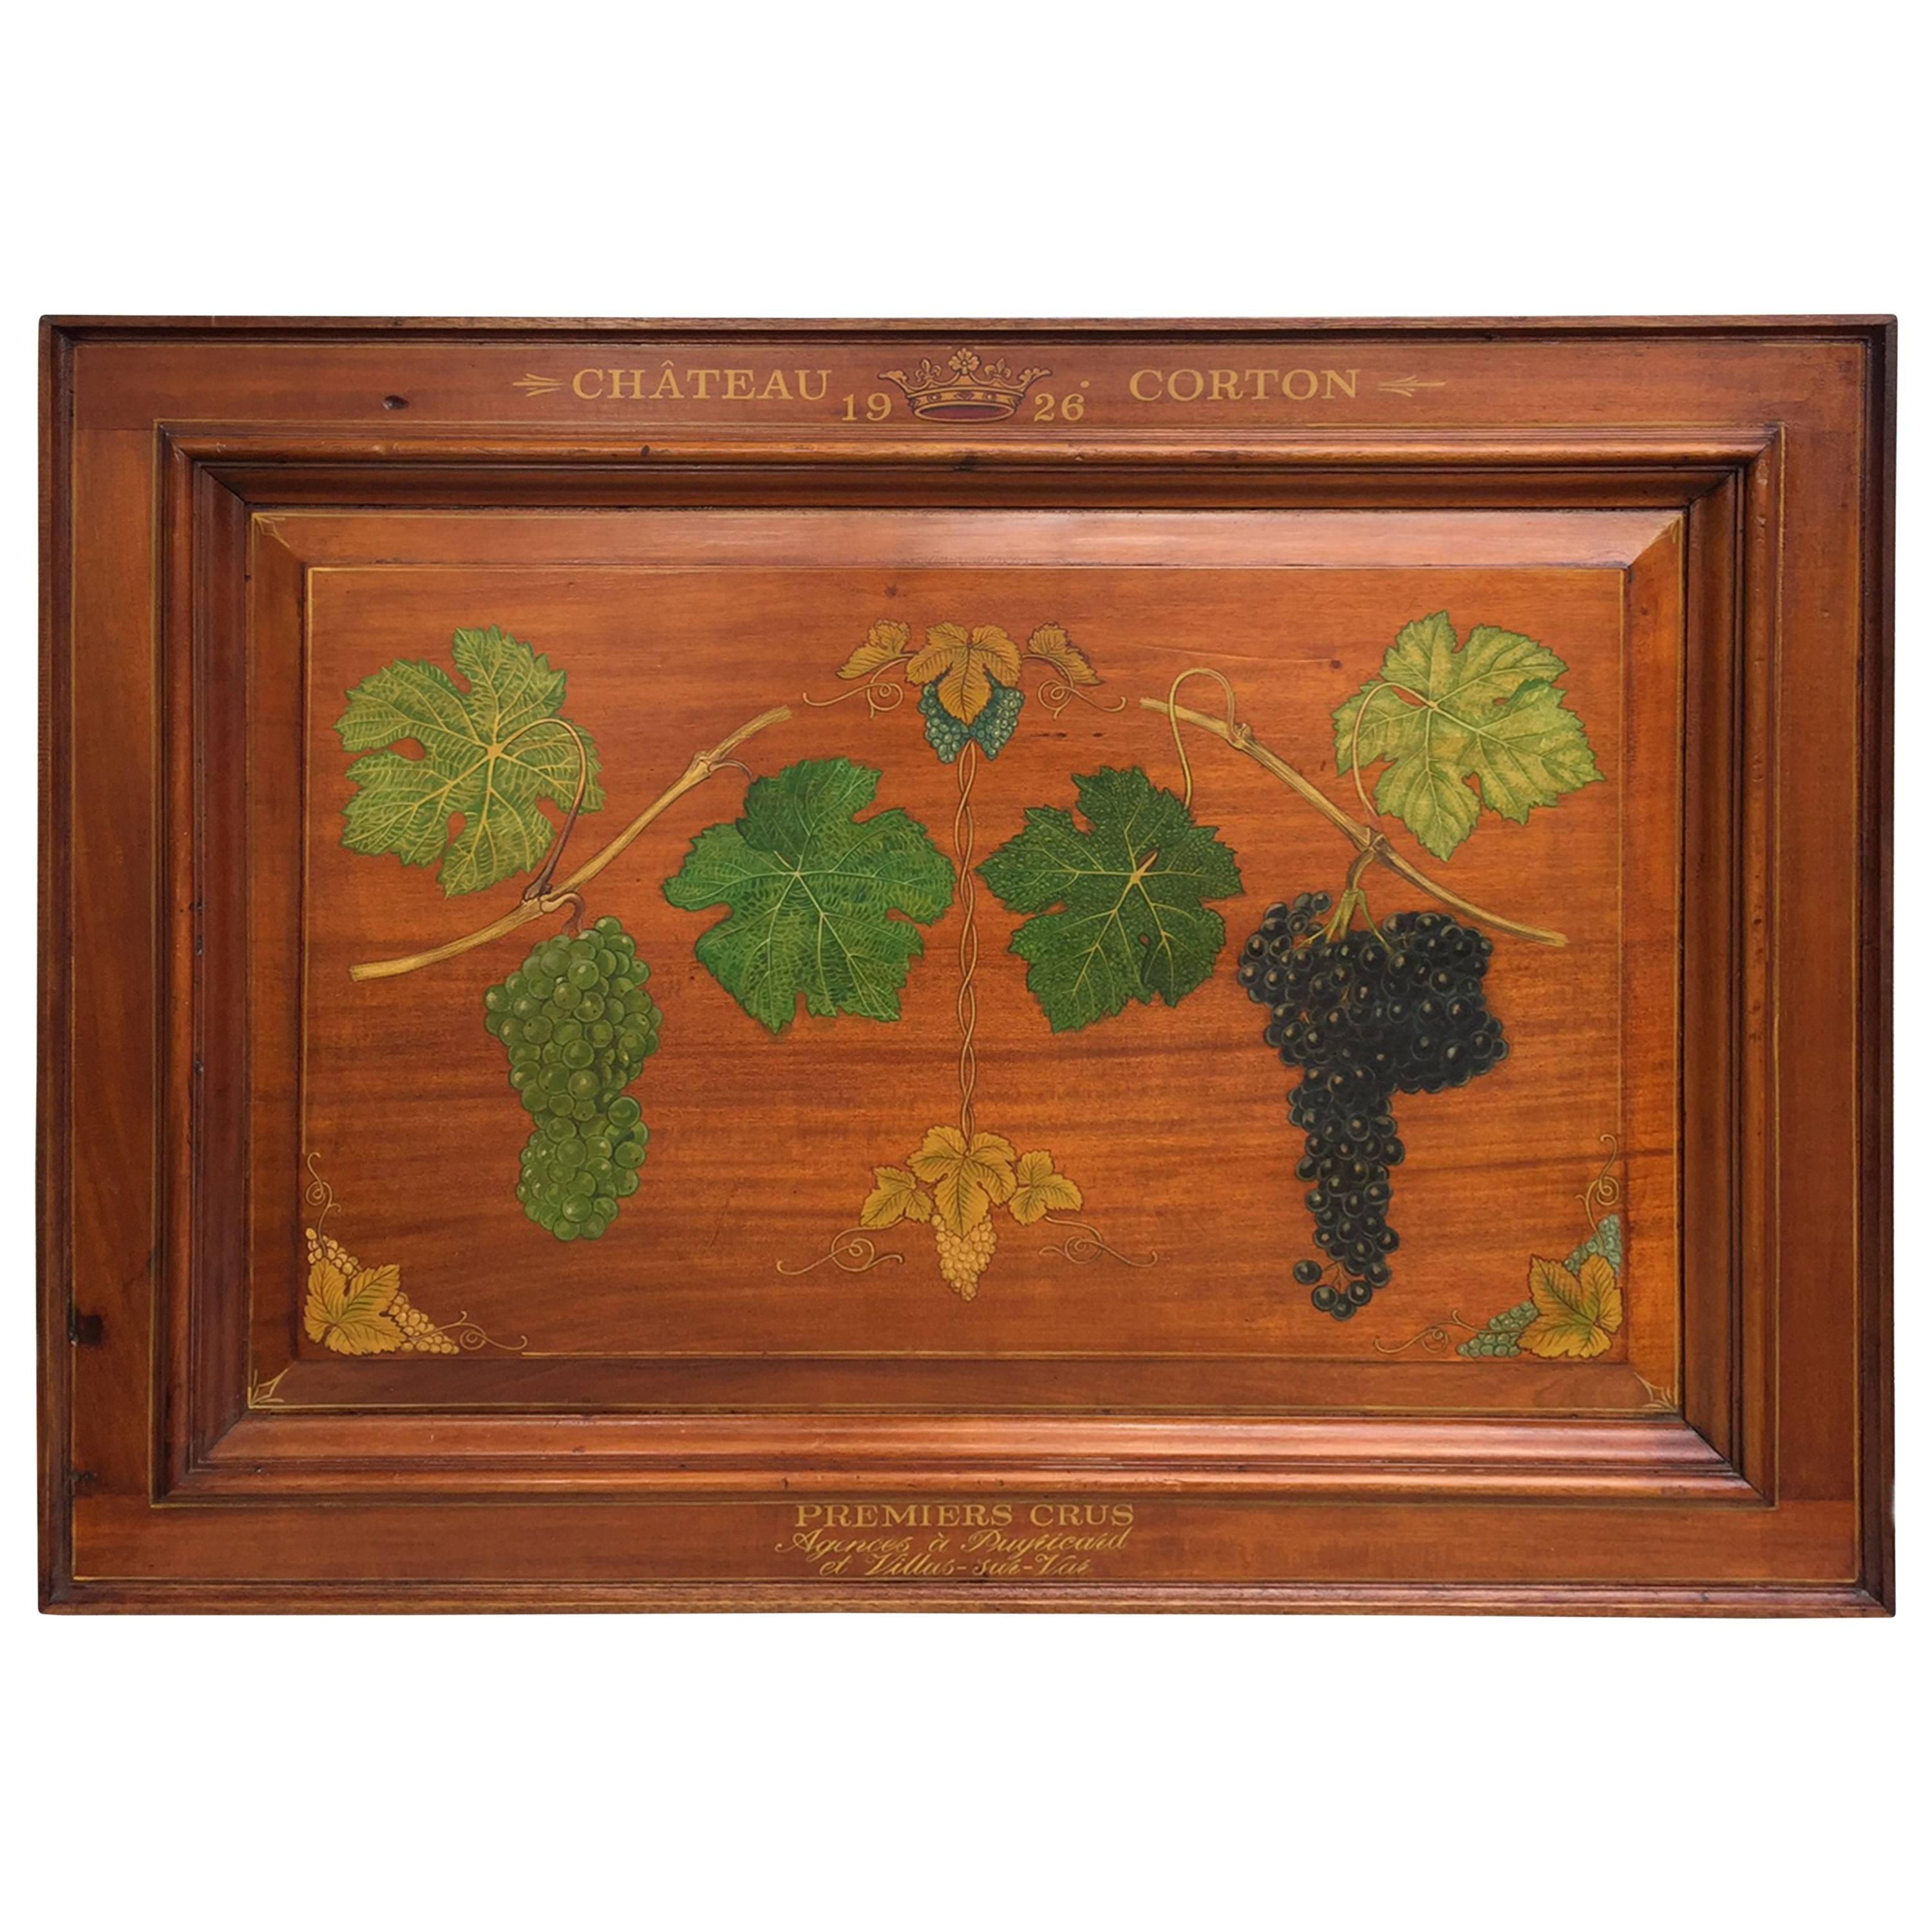 Chateau Corton Mahogany Wine Cellar Hand-Painted Sign, circa 1926 For Sale